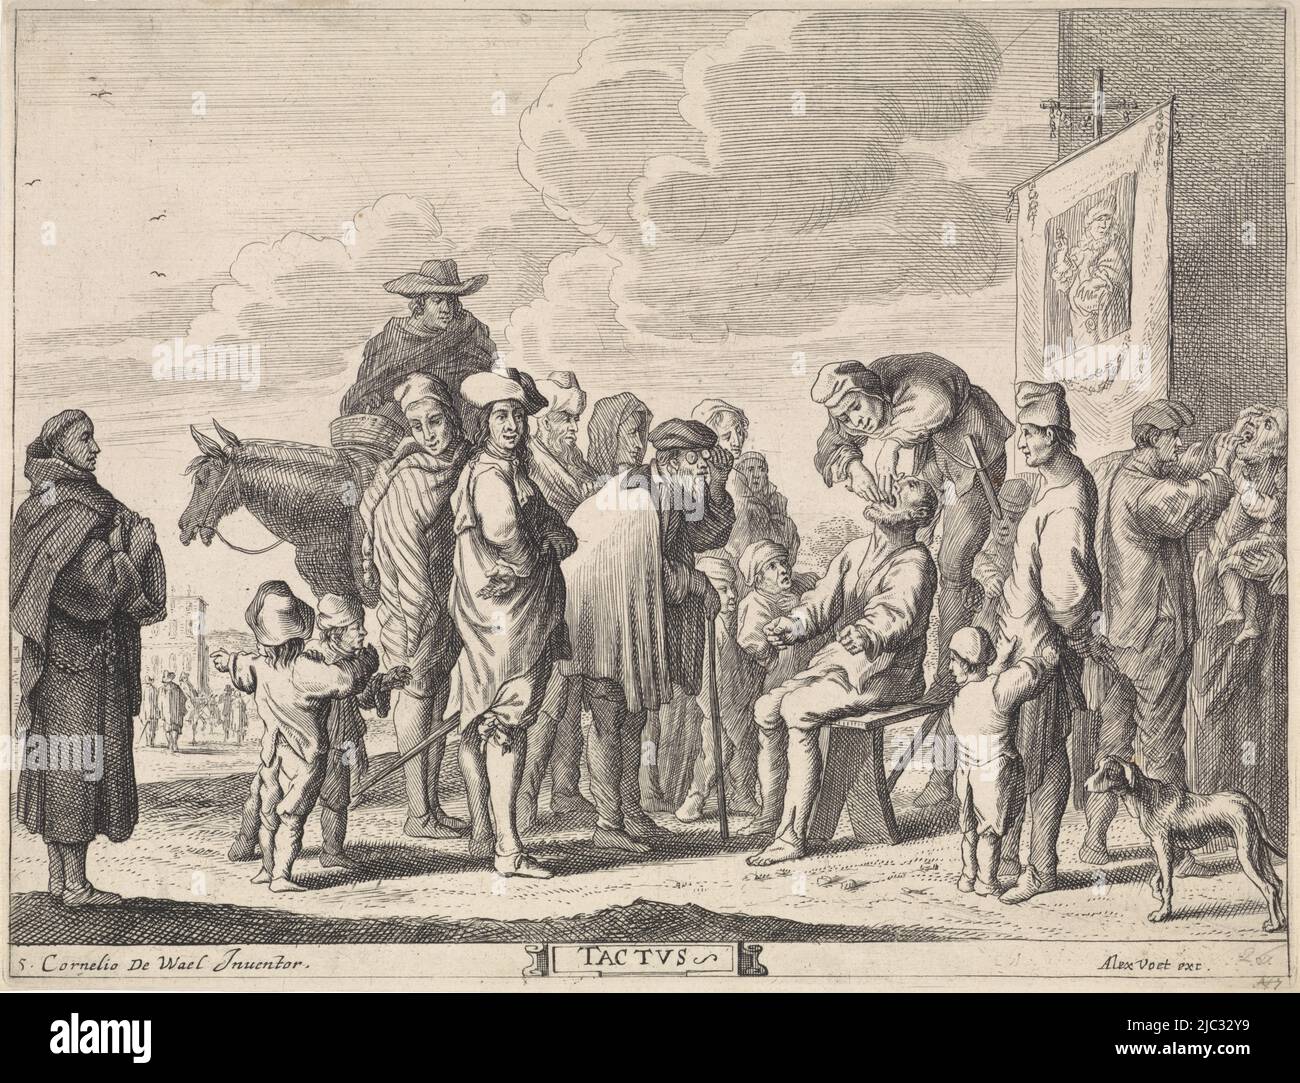 A quack looks into a man's mouth. A group of people have gathered around them. On the left a monk looking on. On the right another quack looking into a woman's mouth., Tastzin Tactvs (title on object) Five senses (series title), Cornelis de Wael, (mentioned on object), Melchior Hamers, (possibly), publisher: Alexander Voet (I), (mentioned on object), Italy, 1628 - 1689, paper, etching, engraving, h 226 mm × w 296 mm Stock Photo